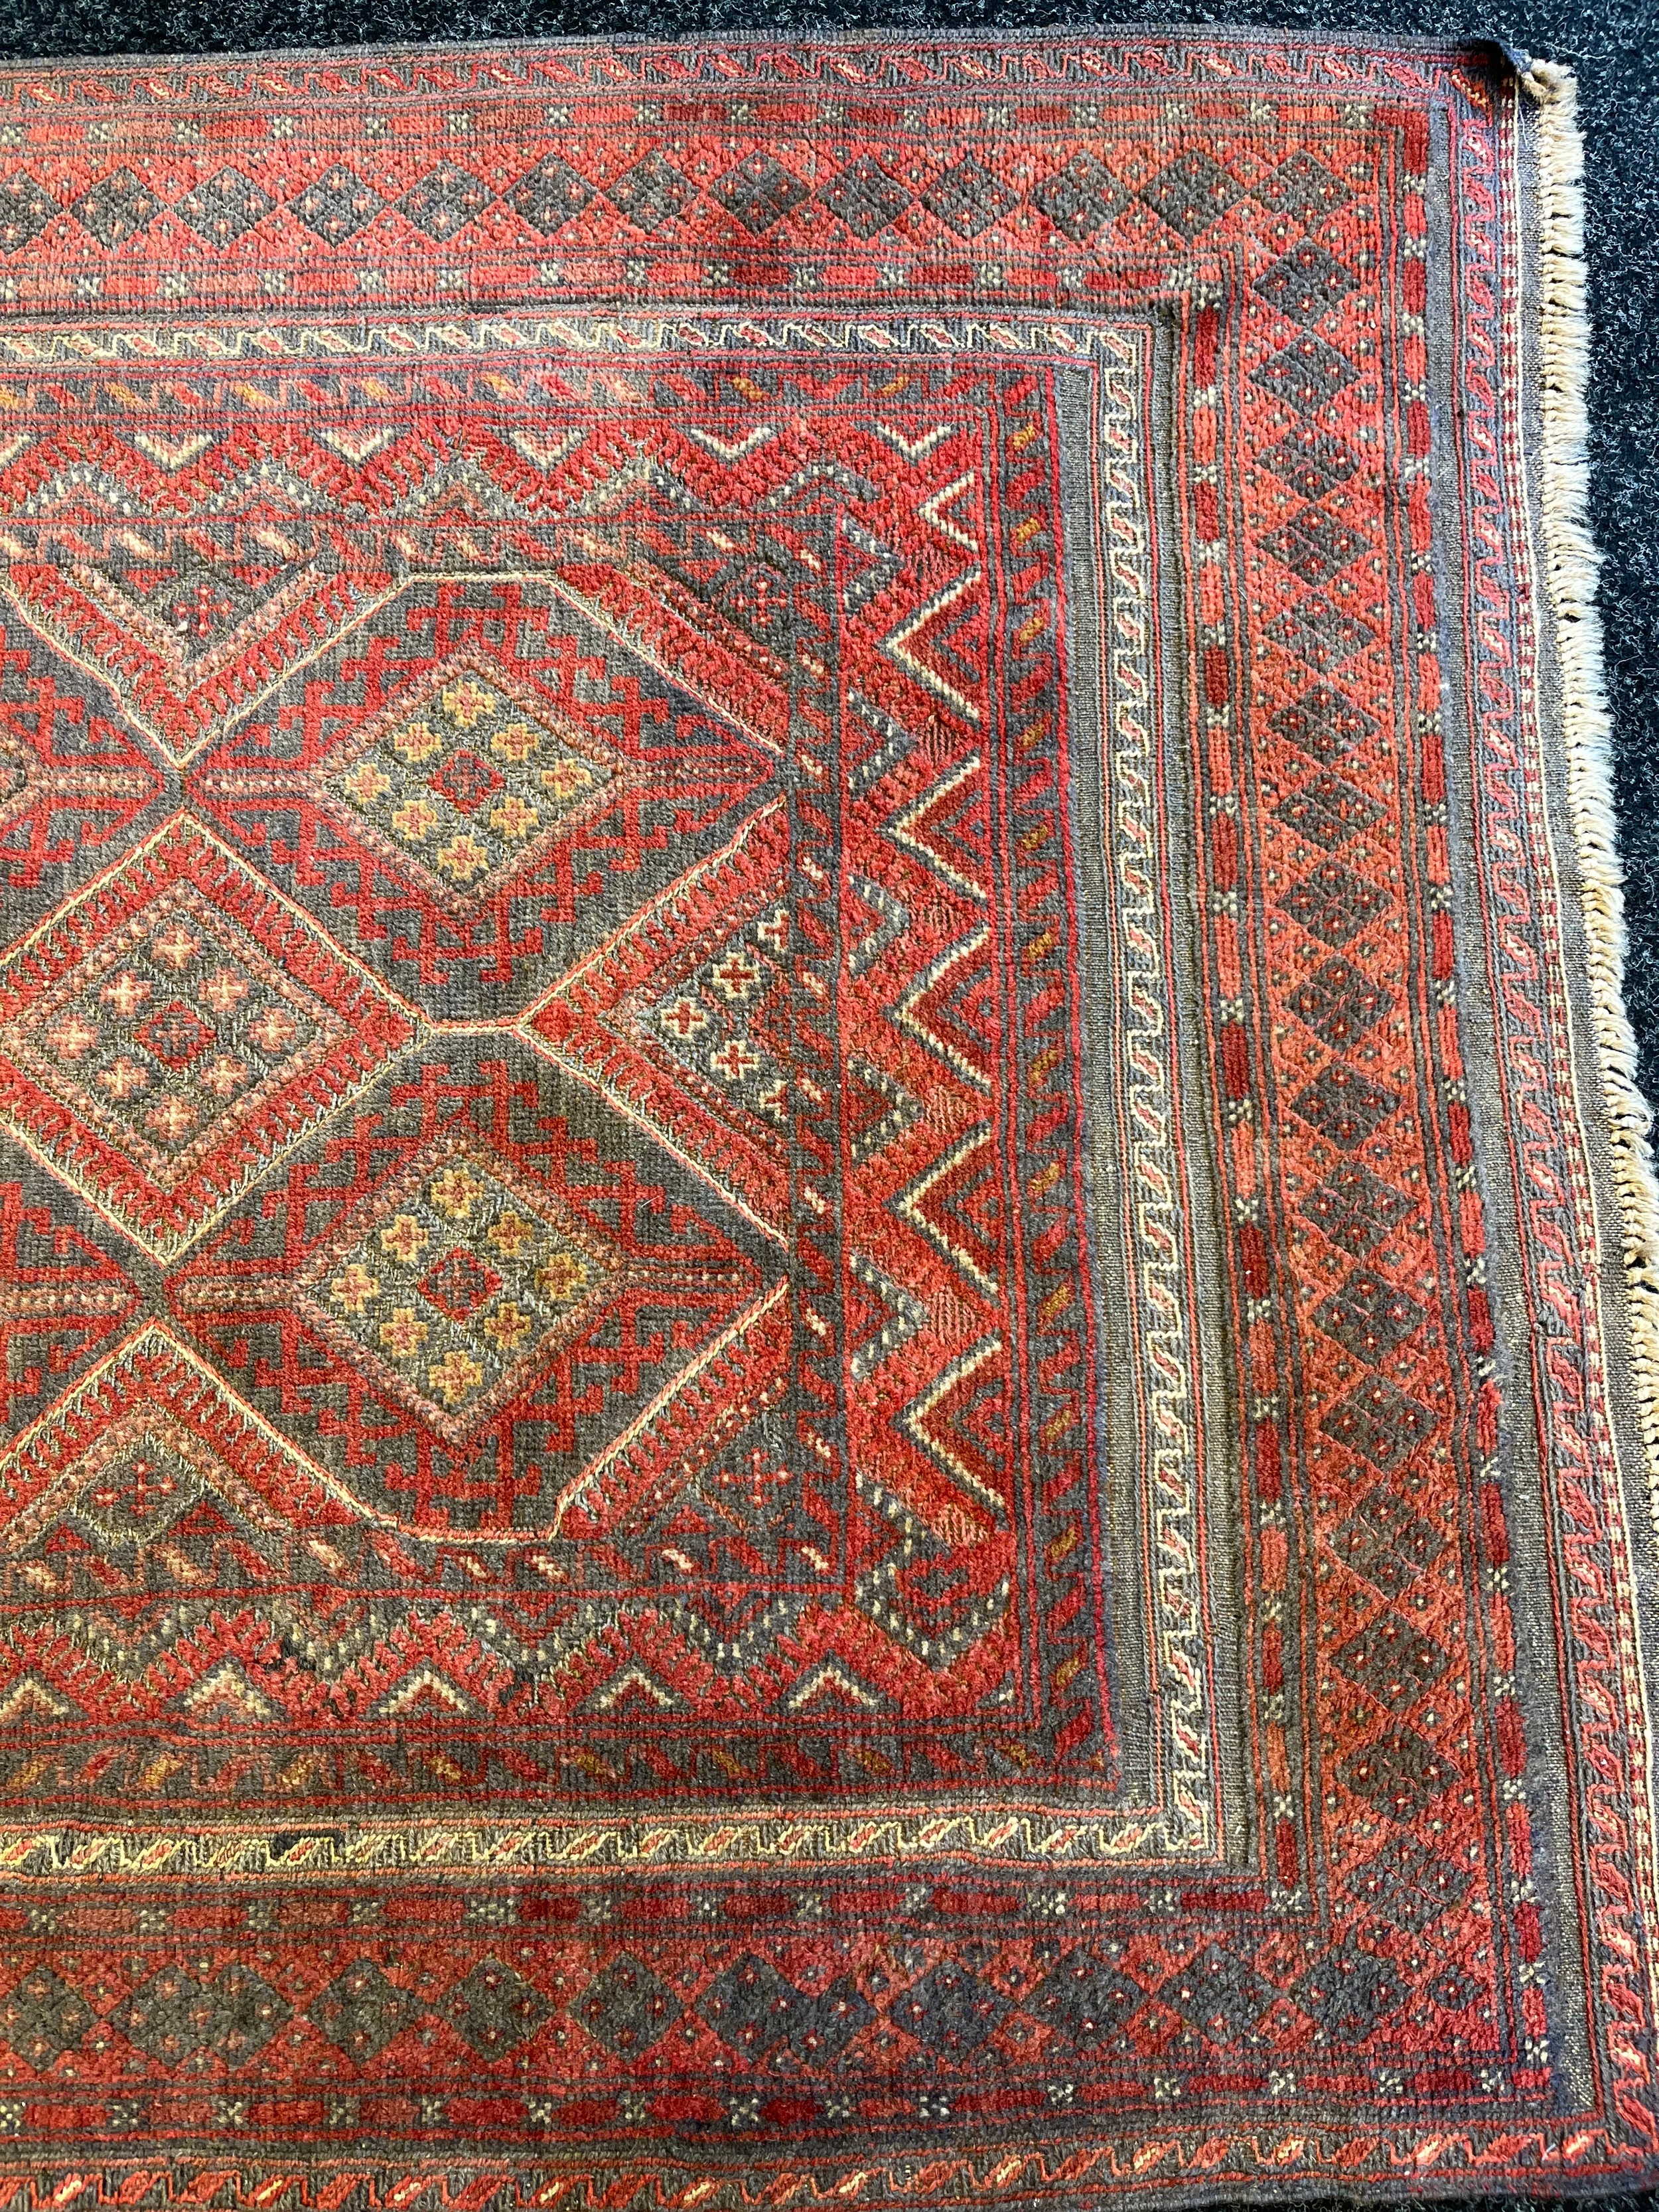 Antique handmade kilm rug, comes with certificate of authenticity [194x121cm] - Image 4 of 7